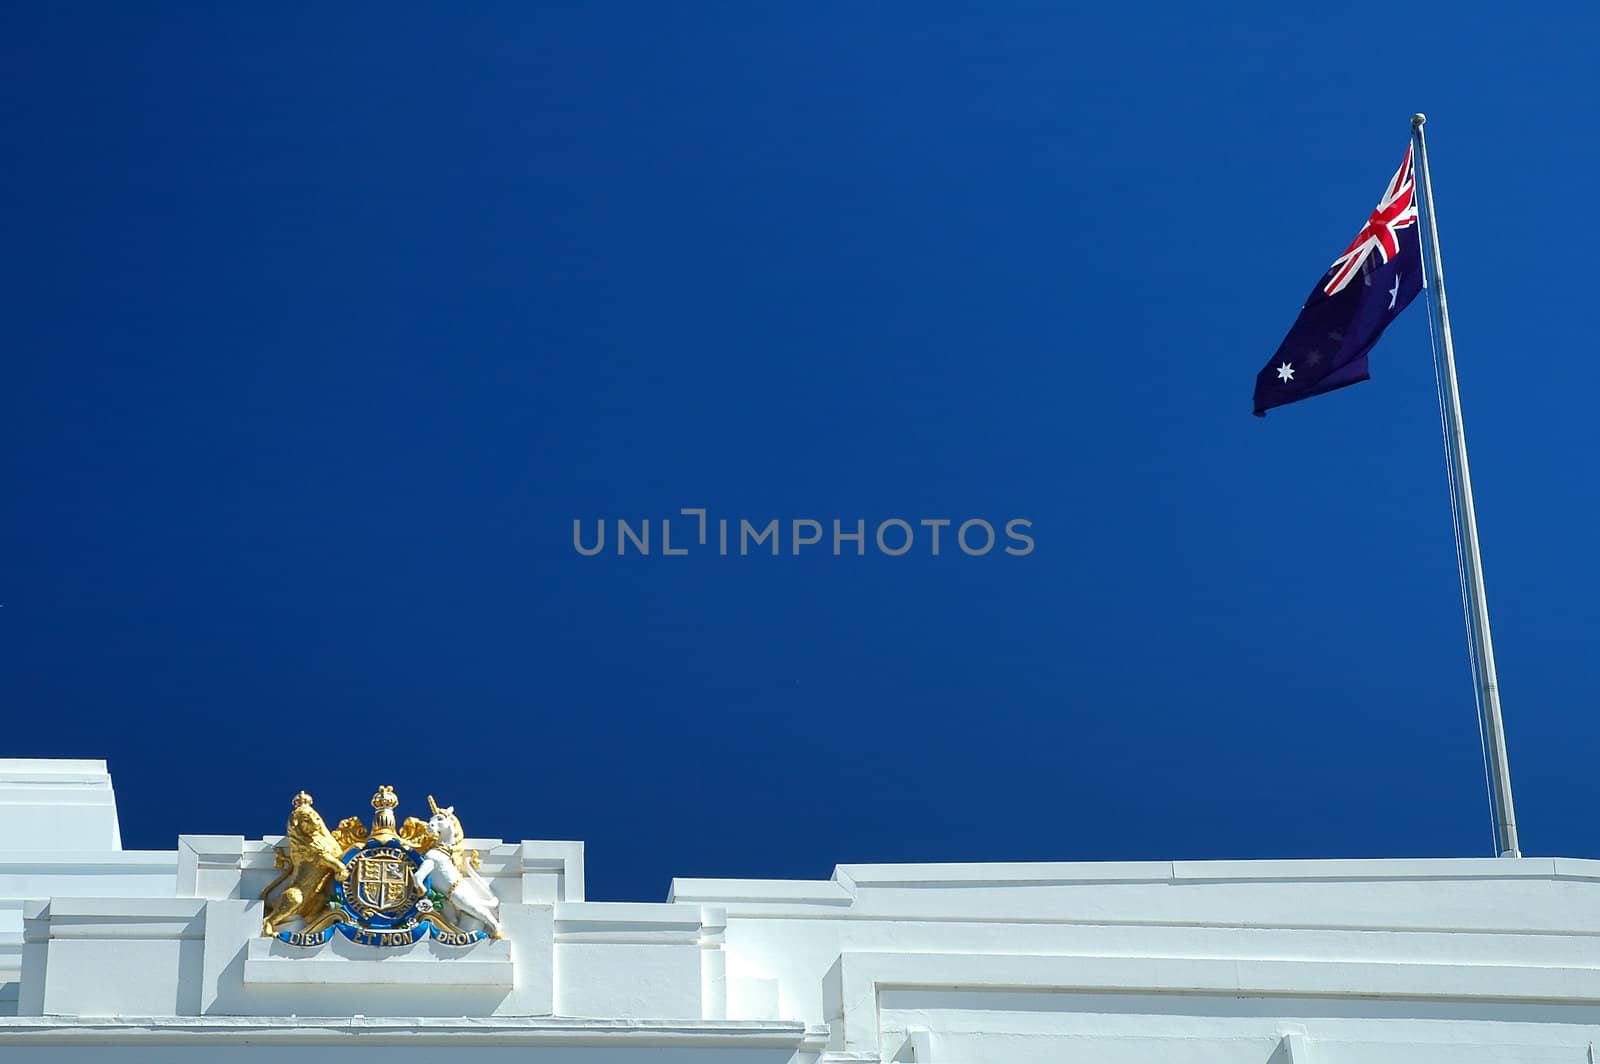 detail photo of Old Parliament House in Canberra, can be used as background